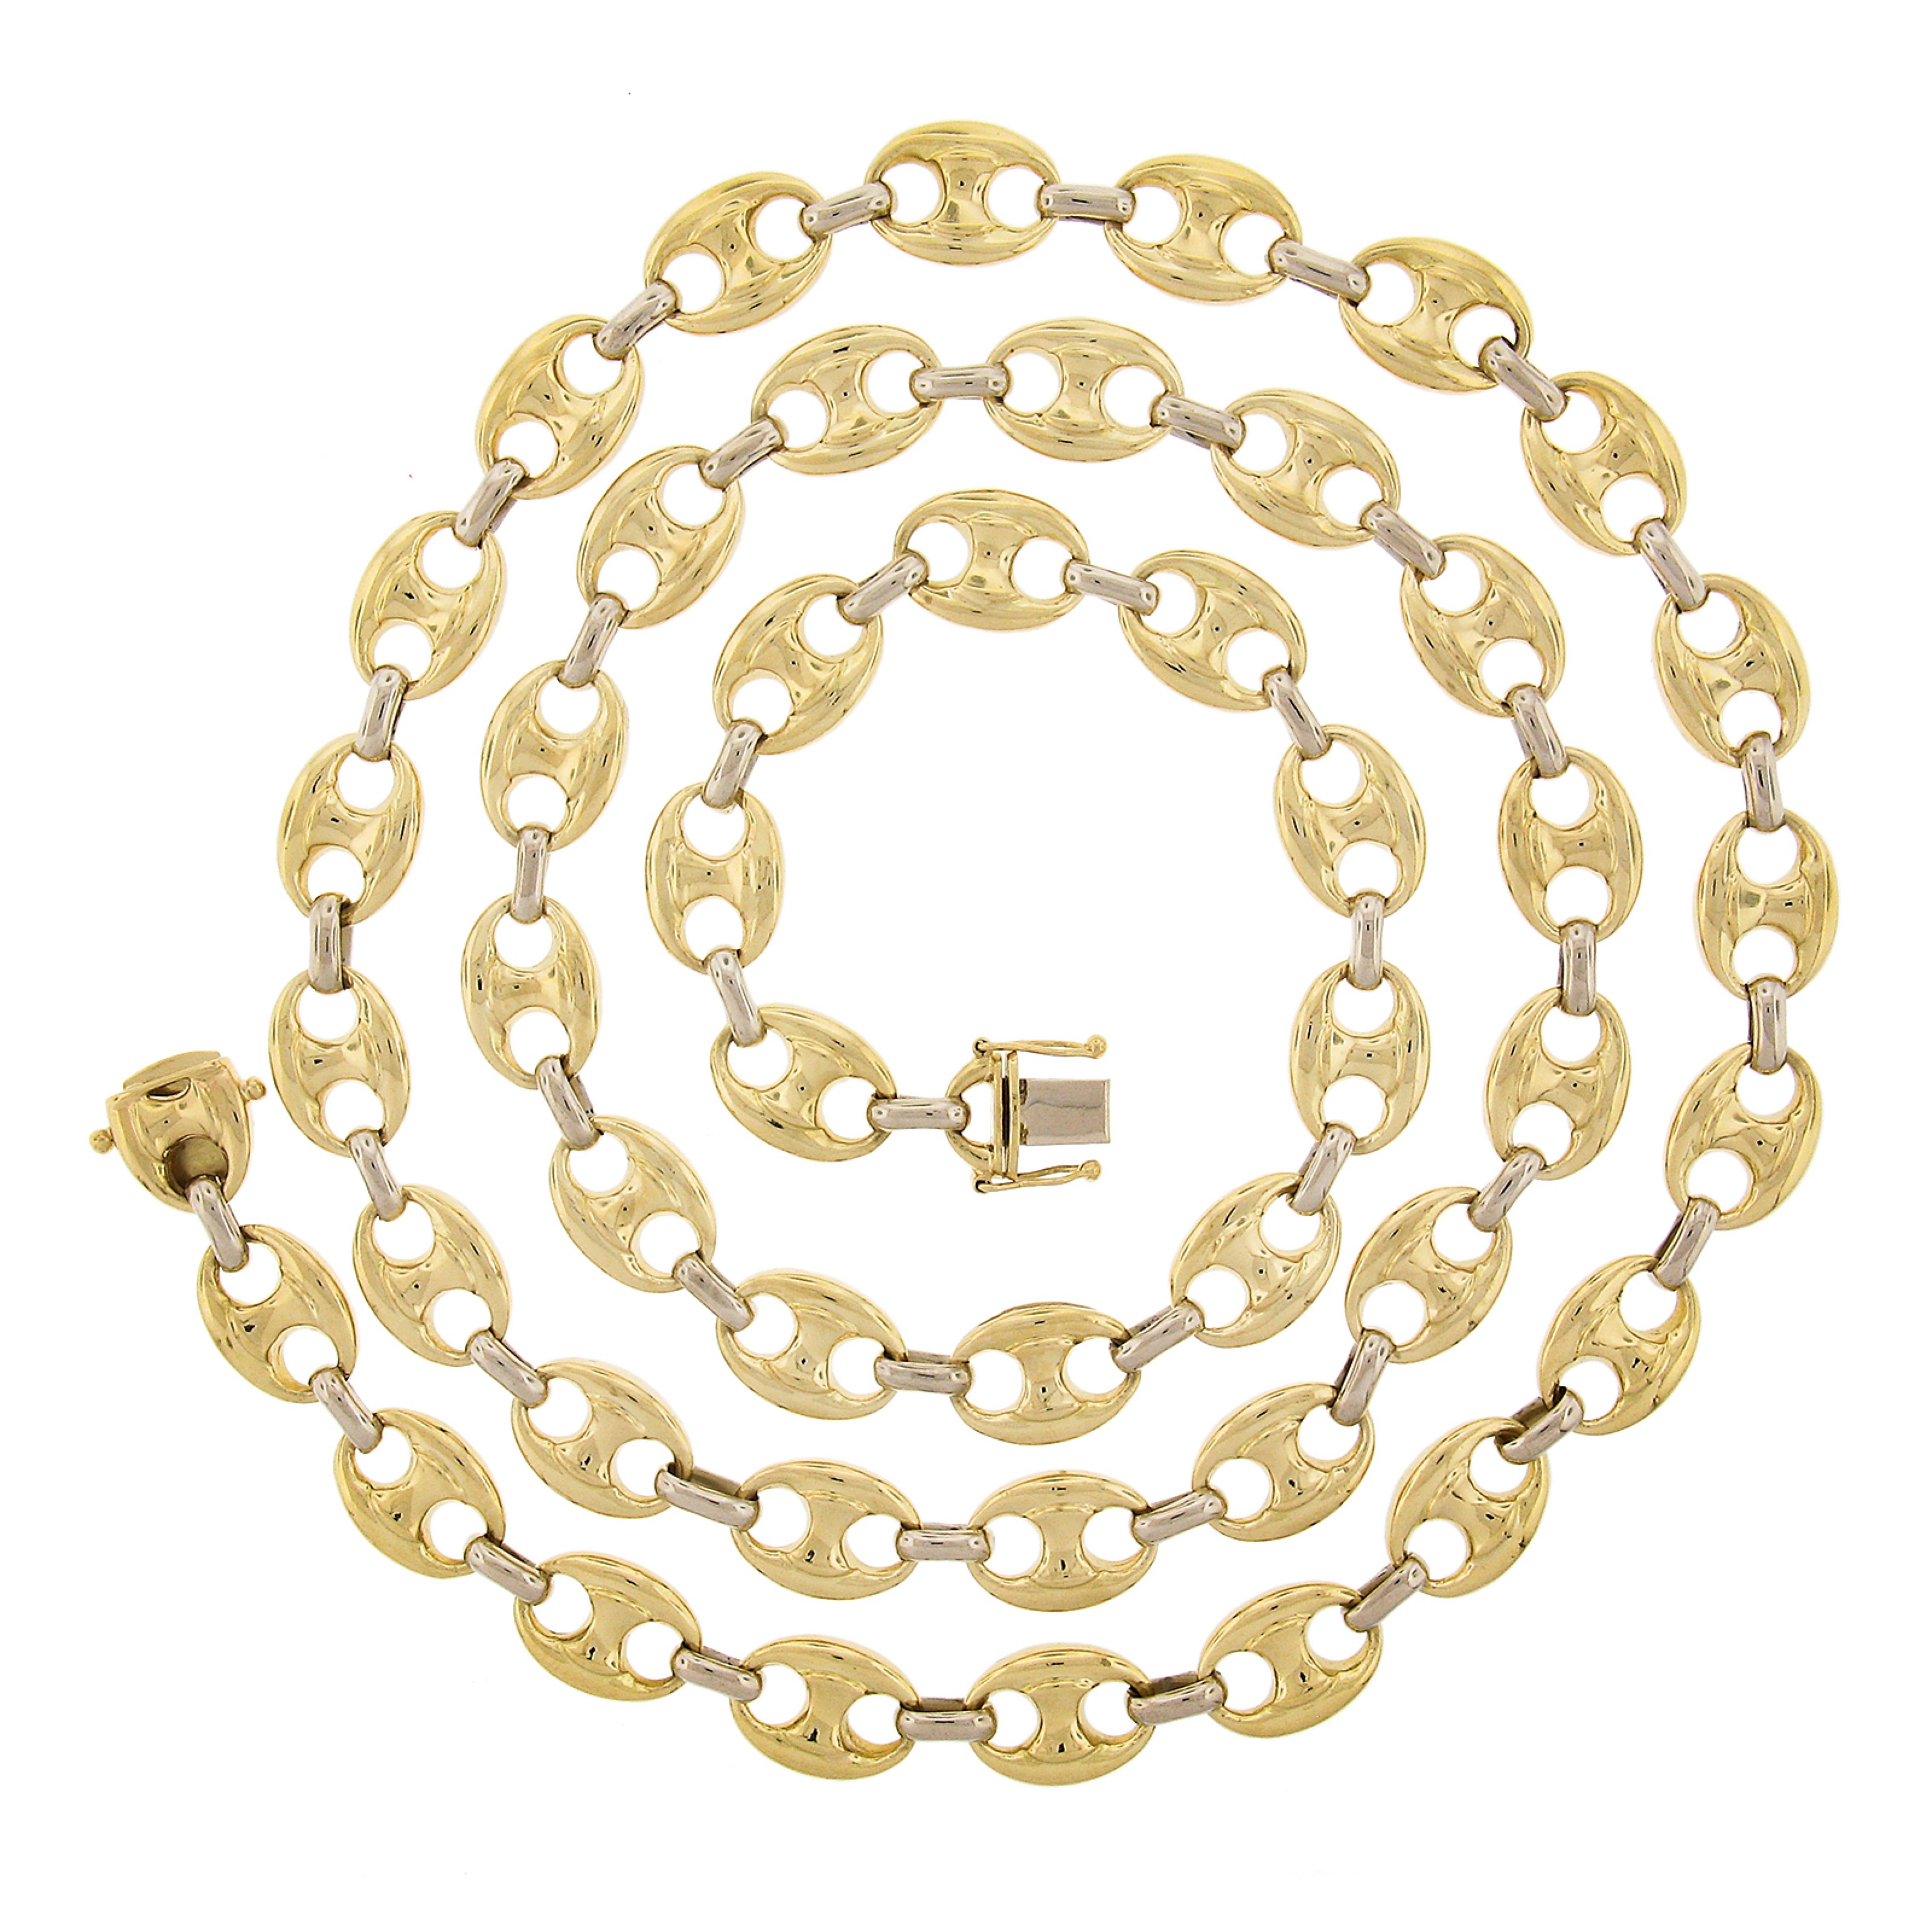 This beautiful and substantial mariner link chain necklace was very well crafted from solid 18k yellow gold with white gold connecting oval links throughout. This 11.6mm wide necklace has a wonderful high-polished finish with a super bold look